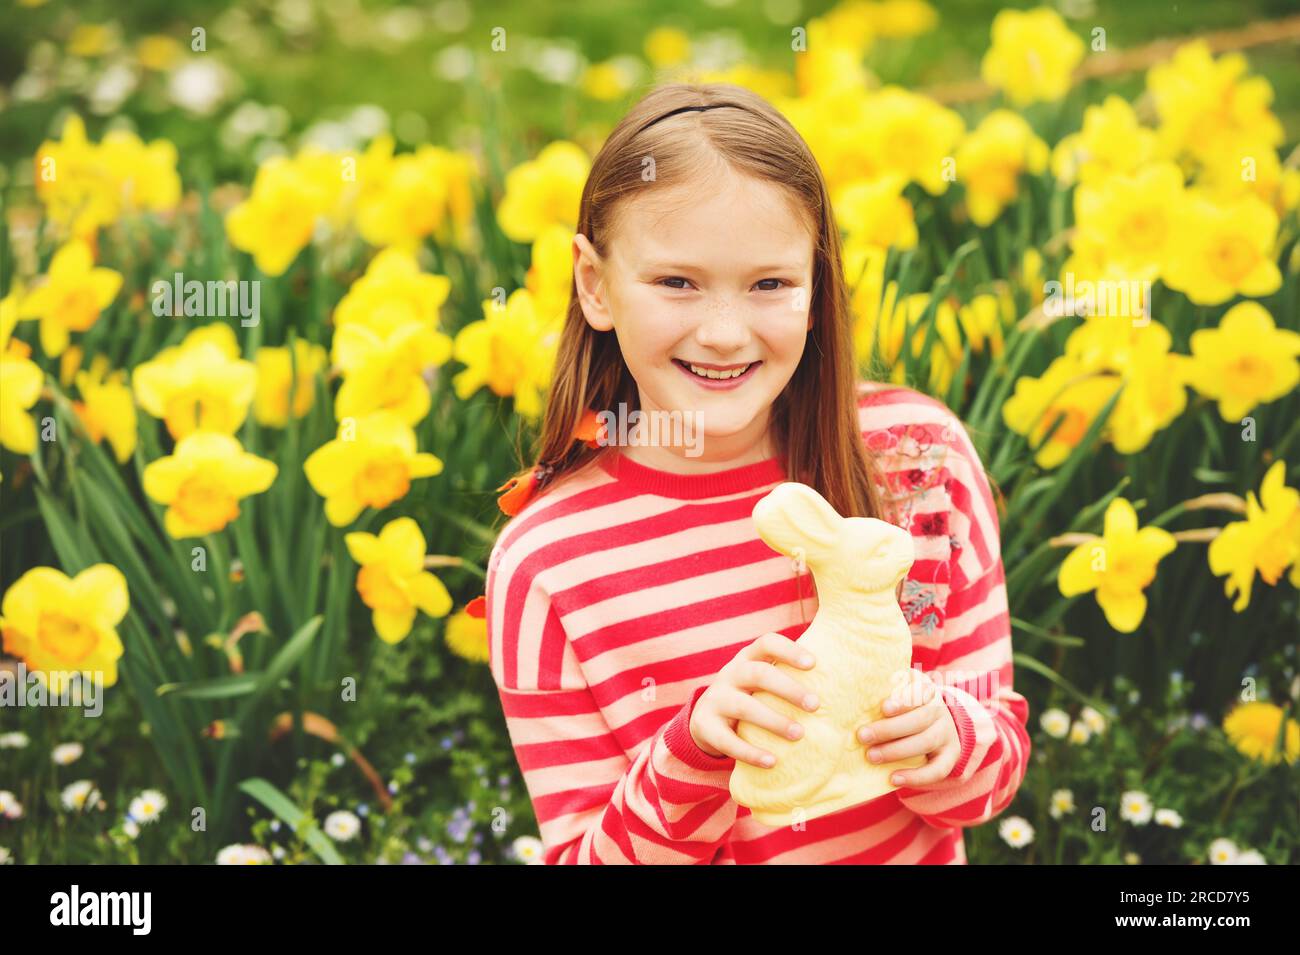 Cute little kid girl with white chocolate Easter bunny celebrating traditional feast. Family, holiday, spring , carefree childhood concept. Stock Photo